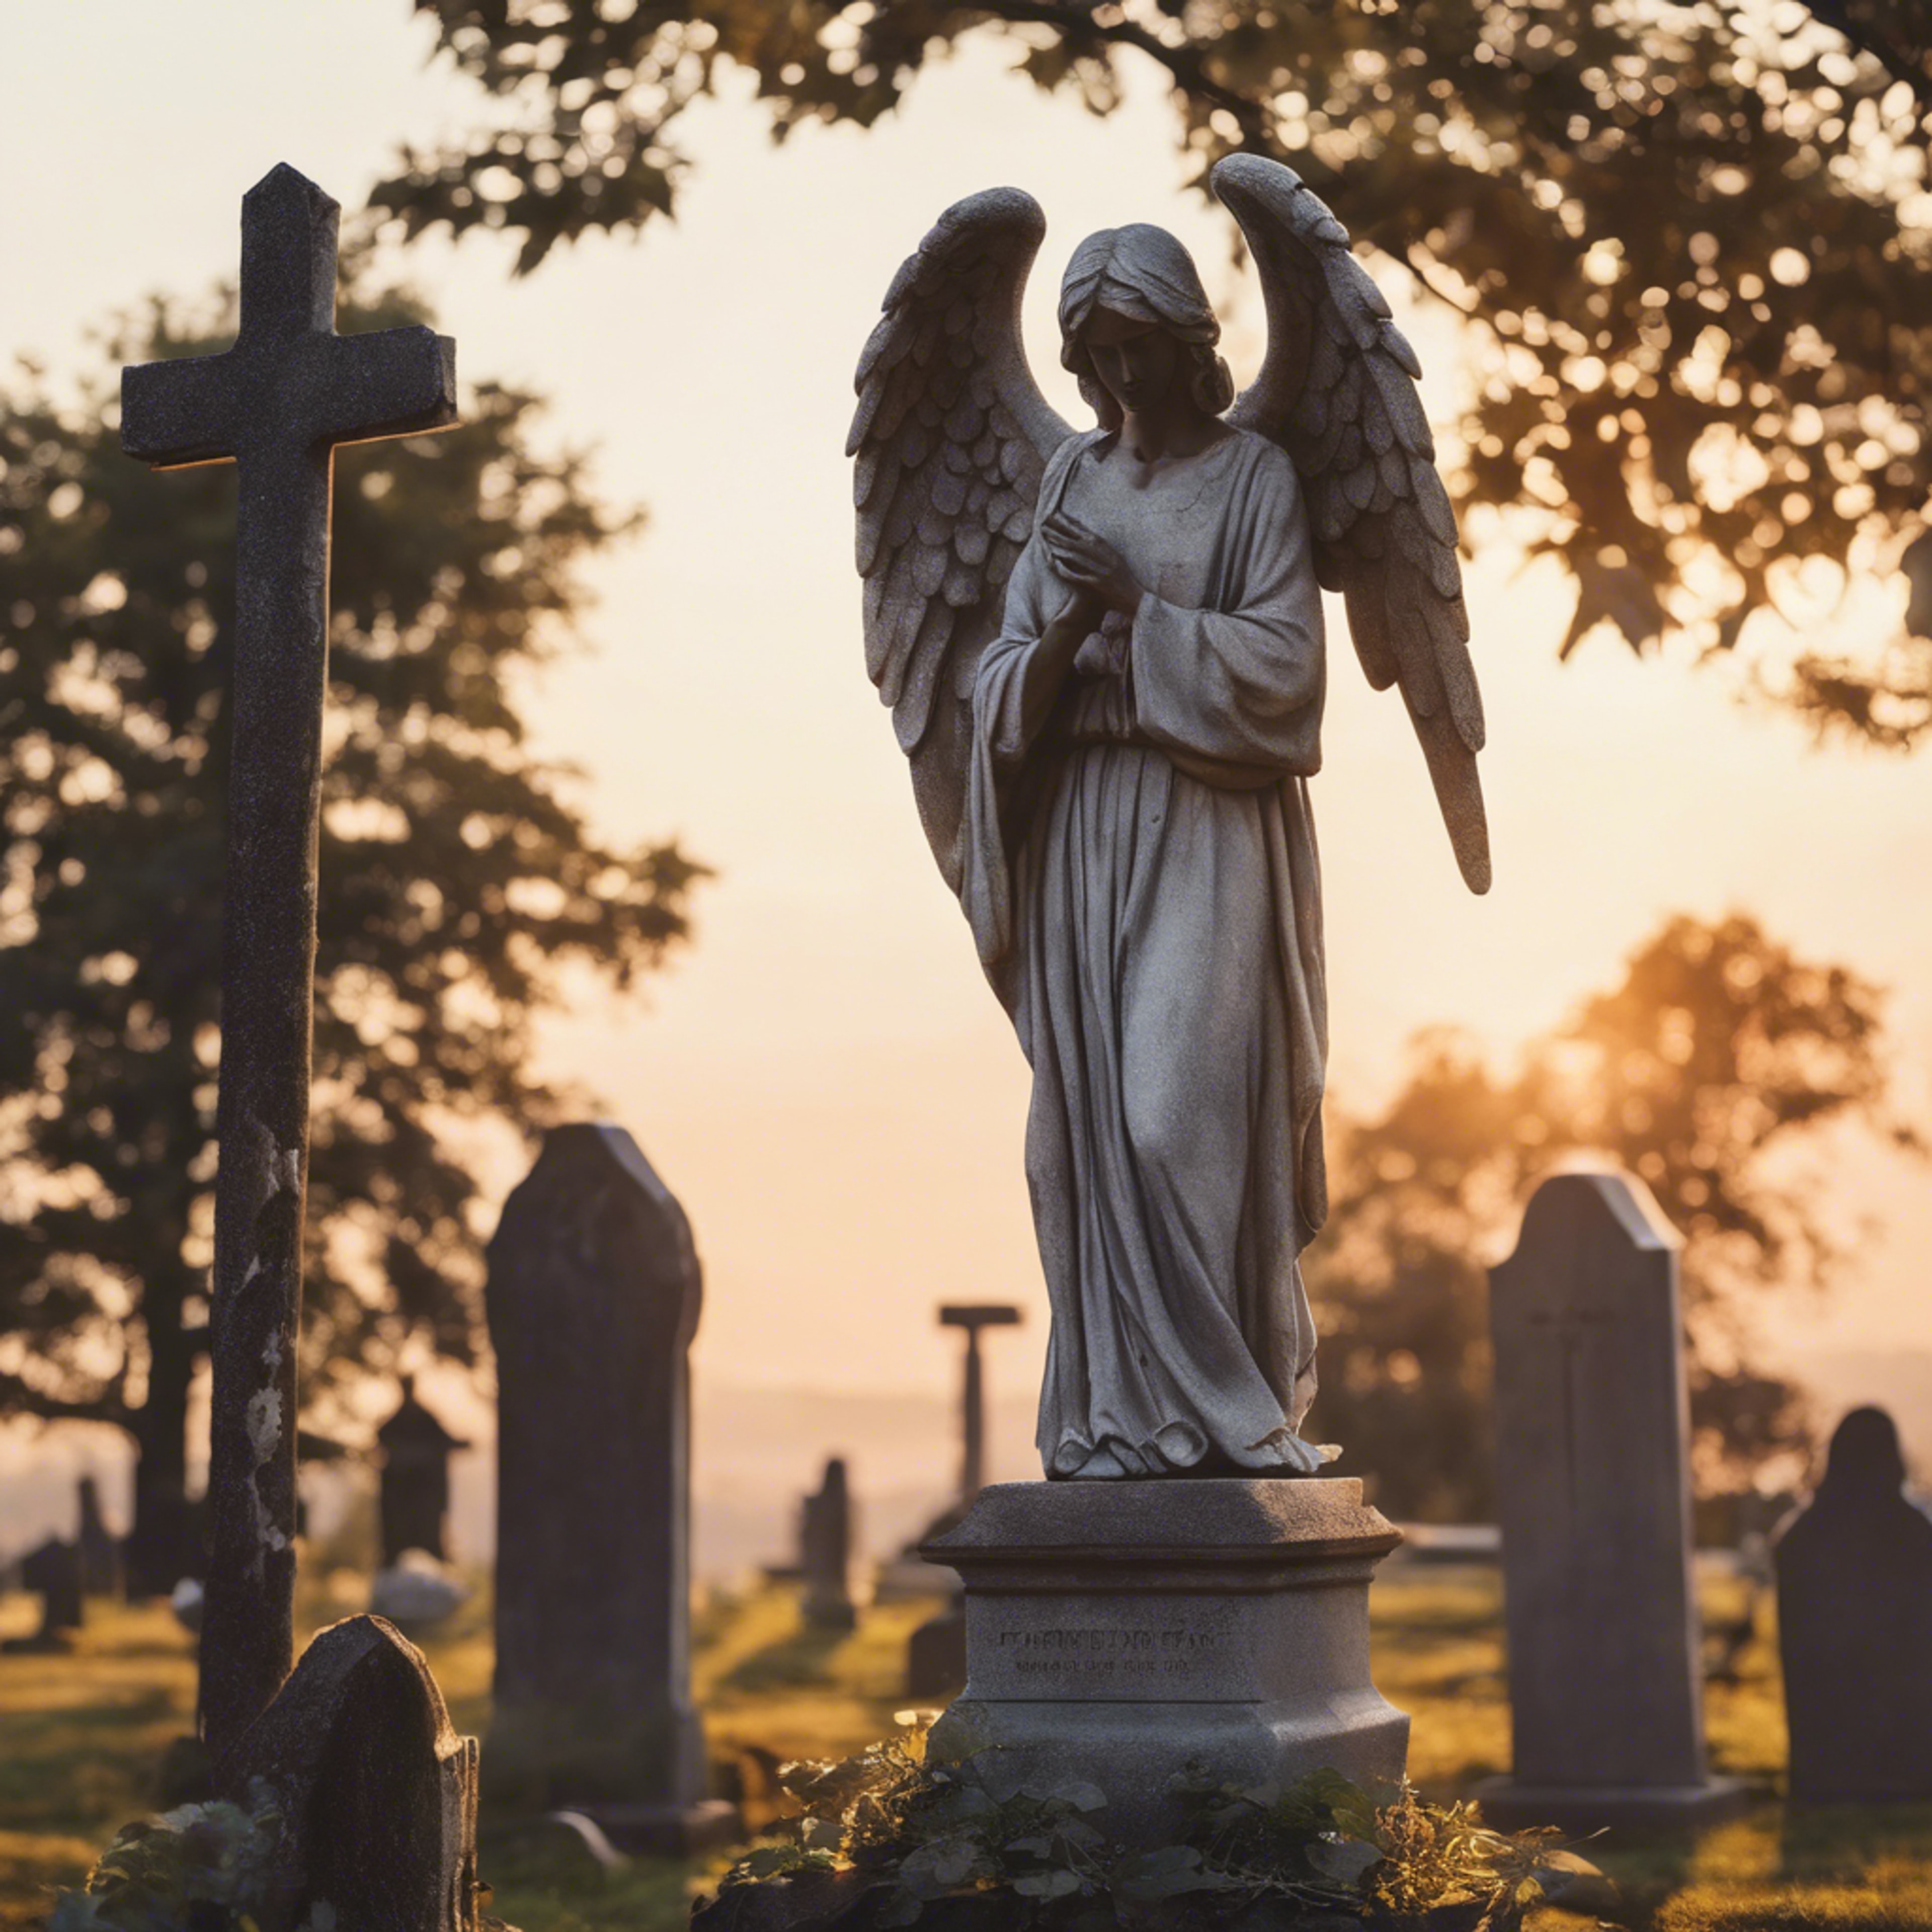 A peaceful graveyard scene with a stone angel statue guarding over the resting place under a serene sunset. Валлпапер[5f1d382335d645bc8b2f]